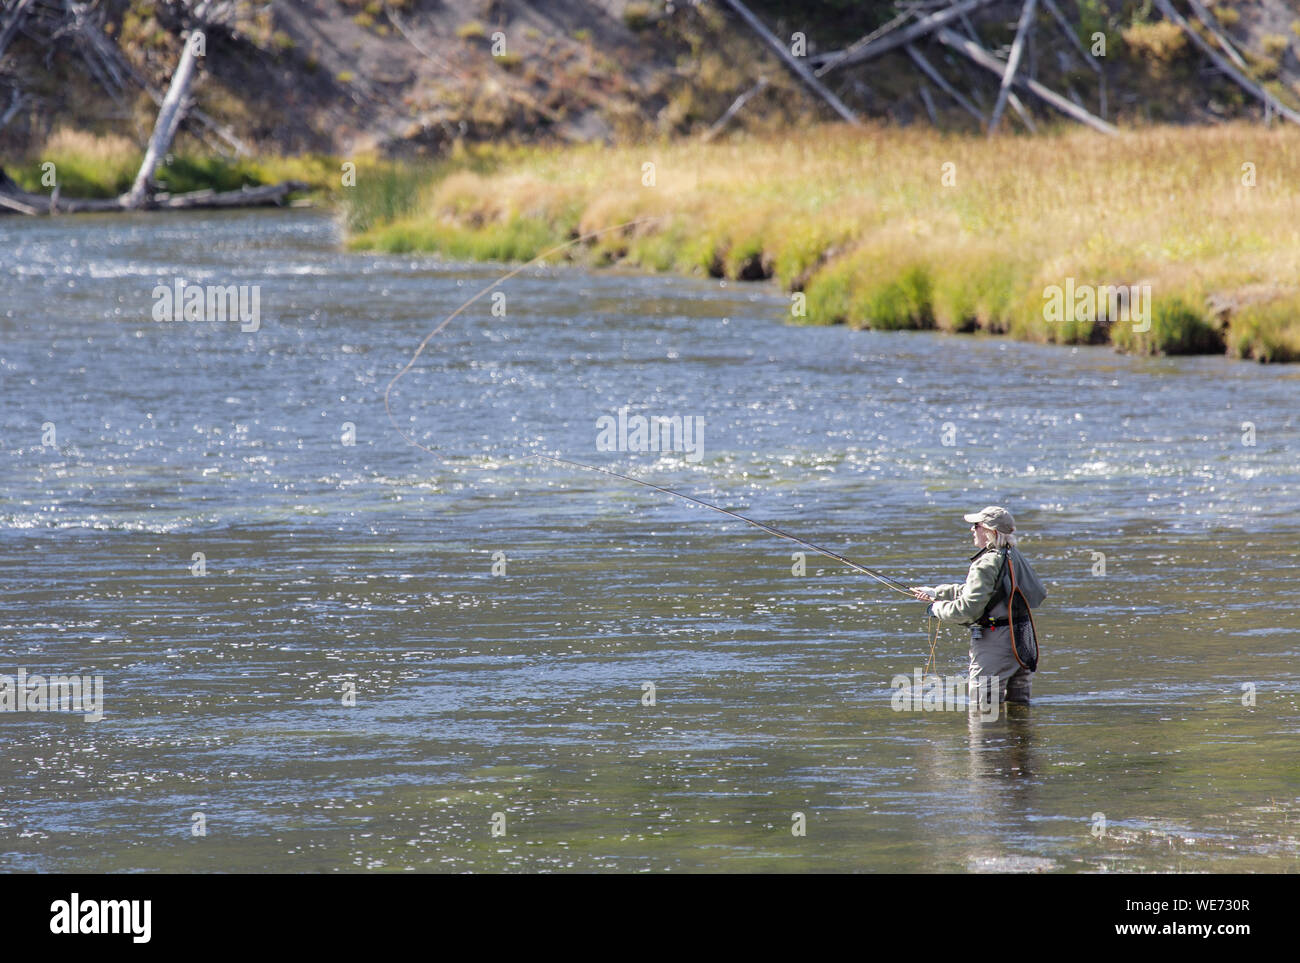 Fly Fishing, Yellowstone National Park. A woman fly fishing in the